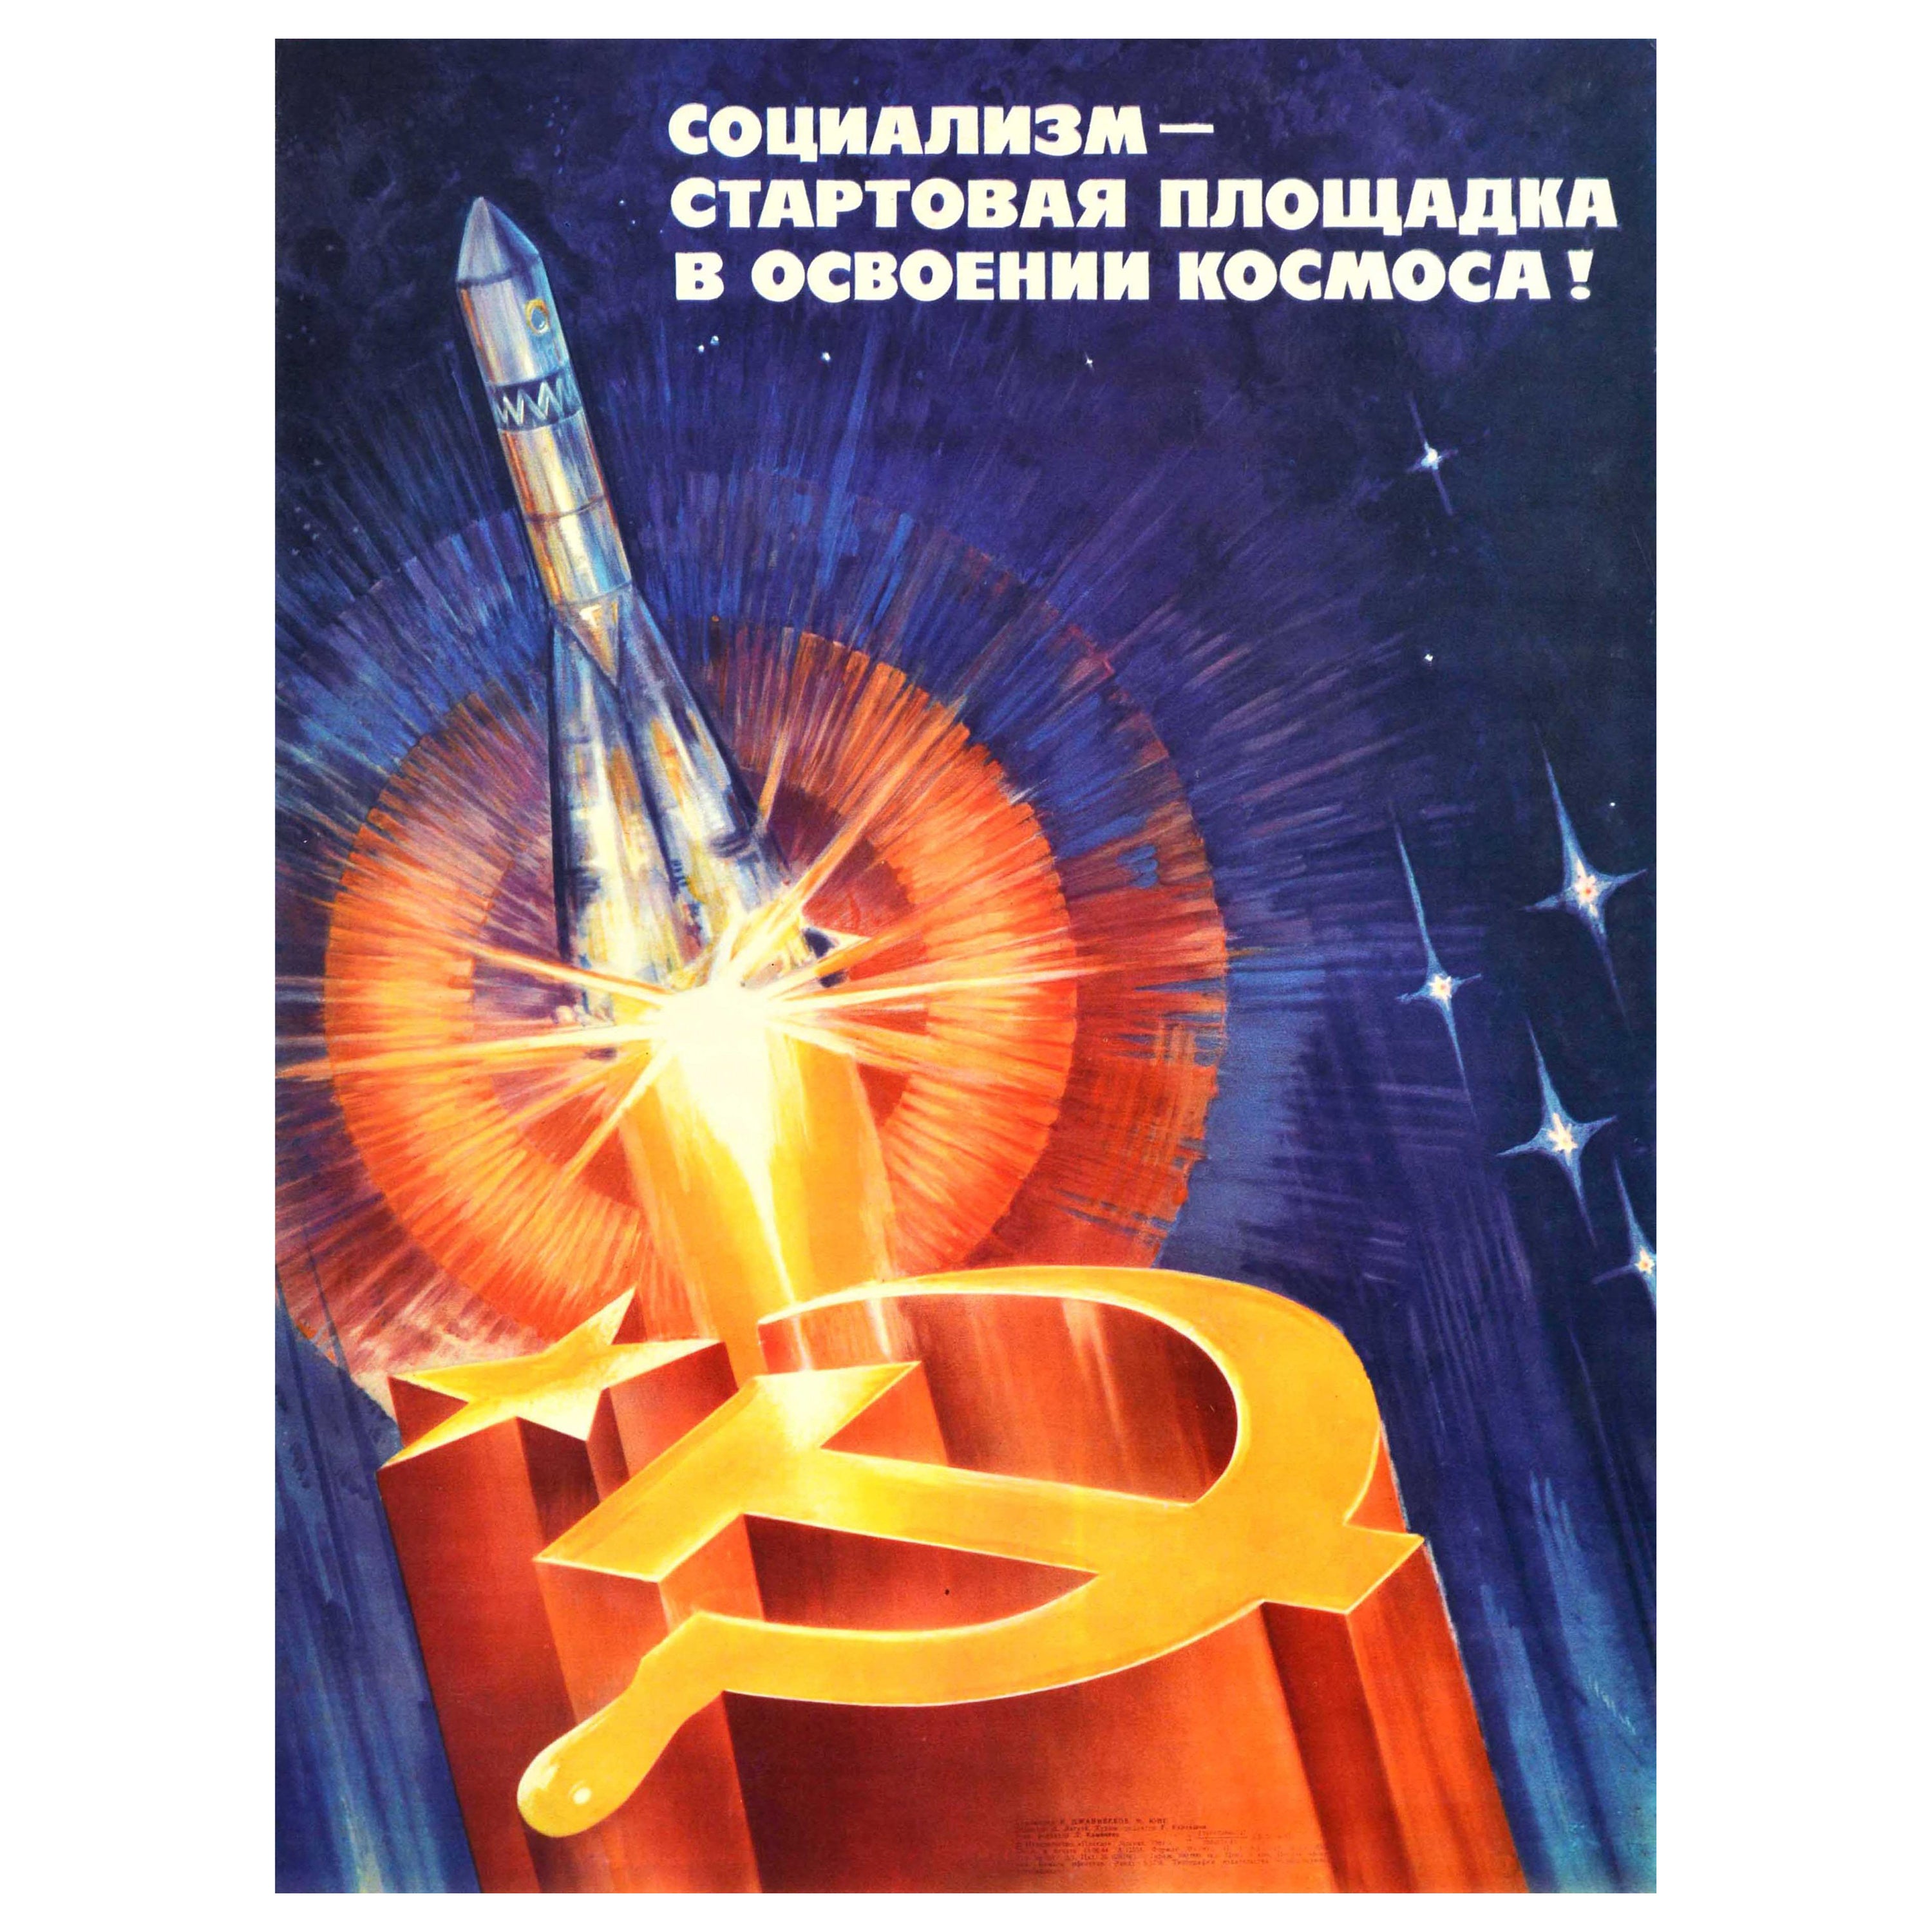 Original Vintage Soviet Poster Socialism Launching Pad To Space Exploration USSR